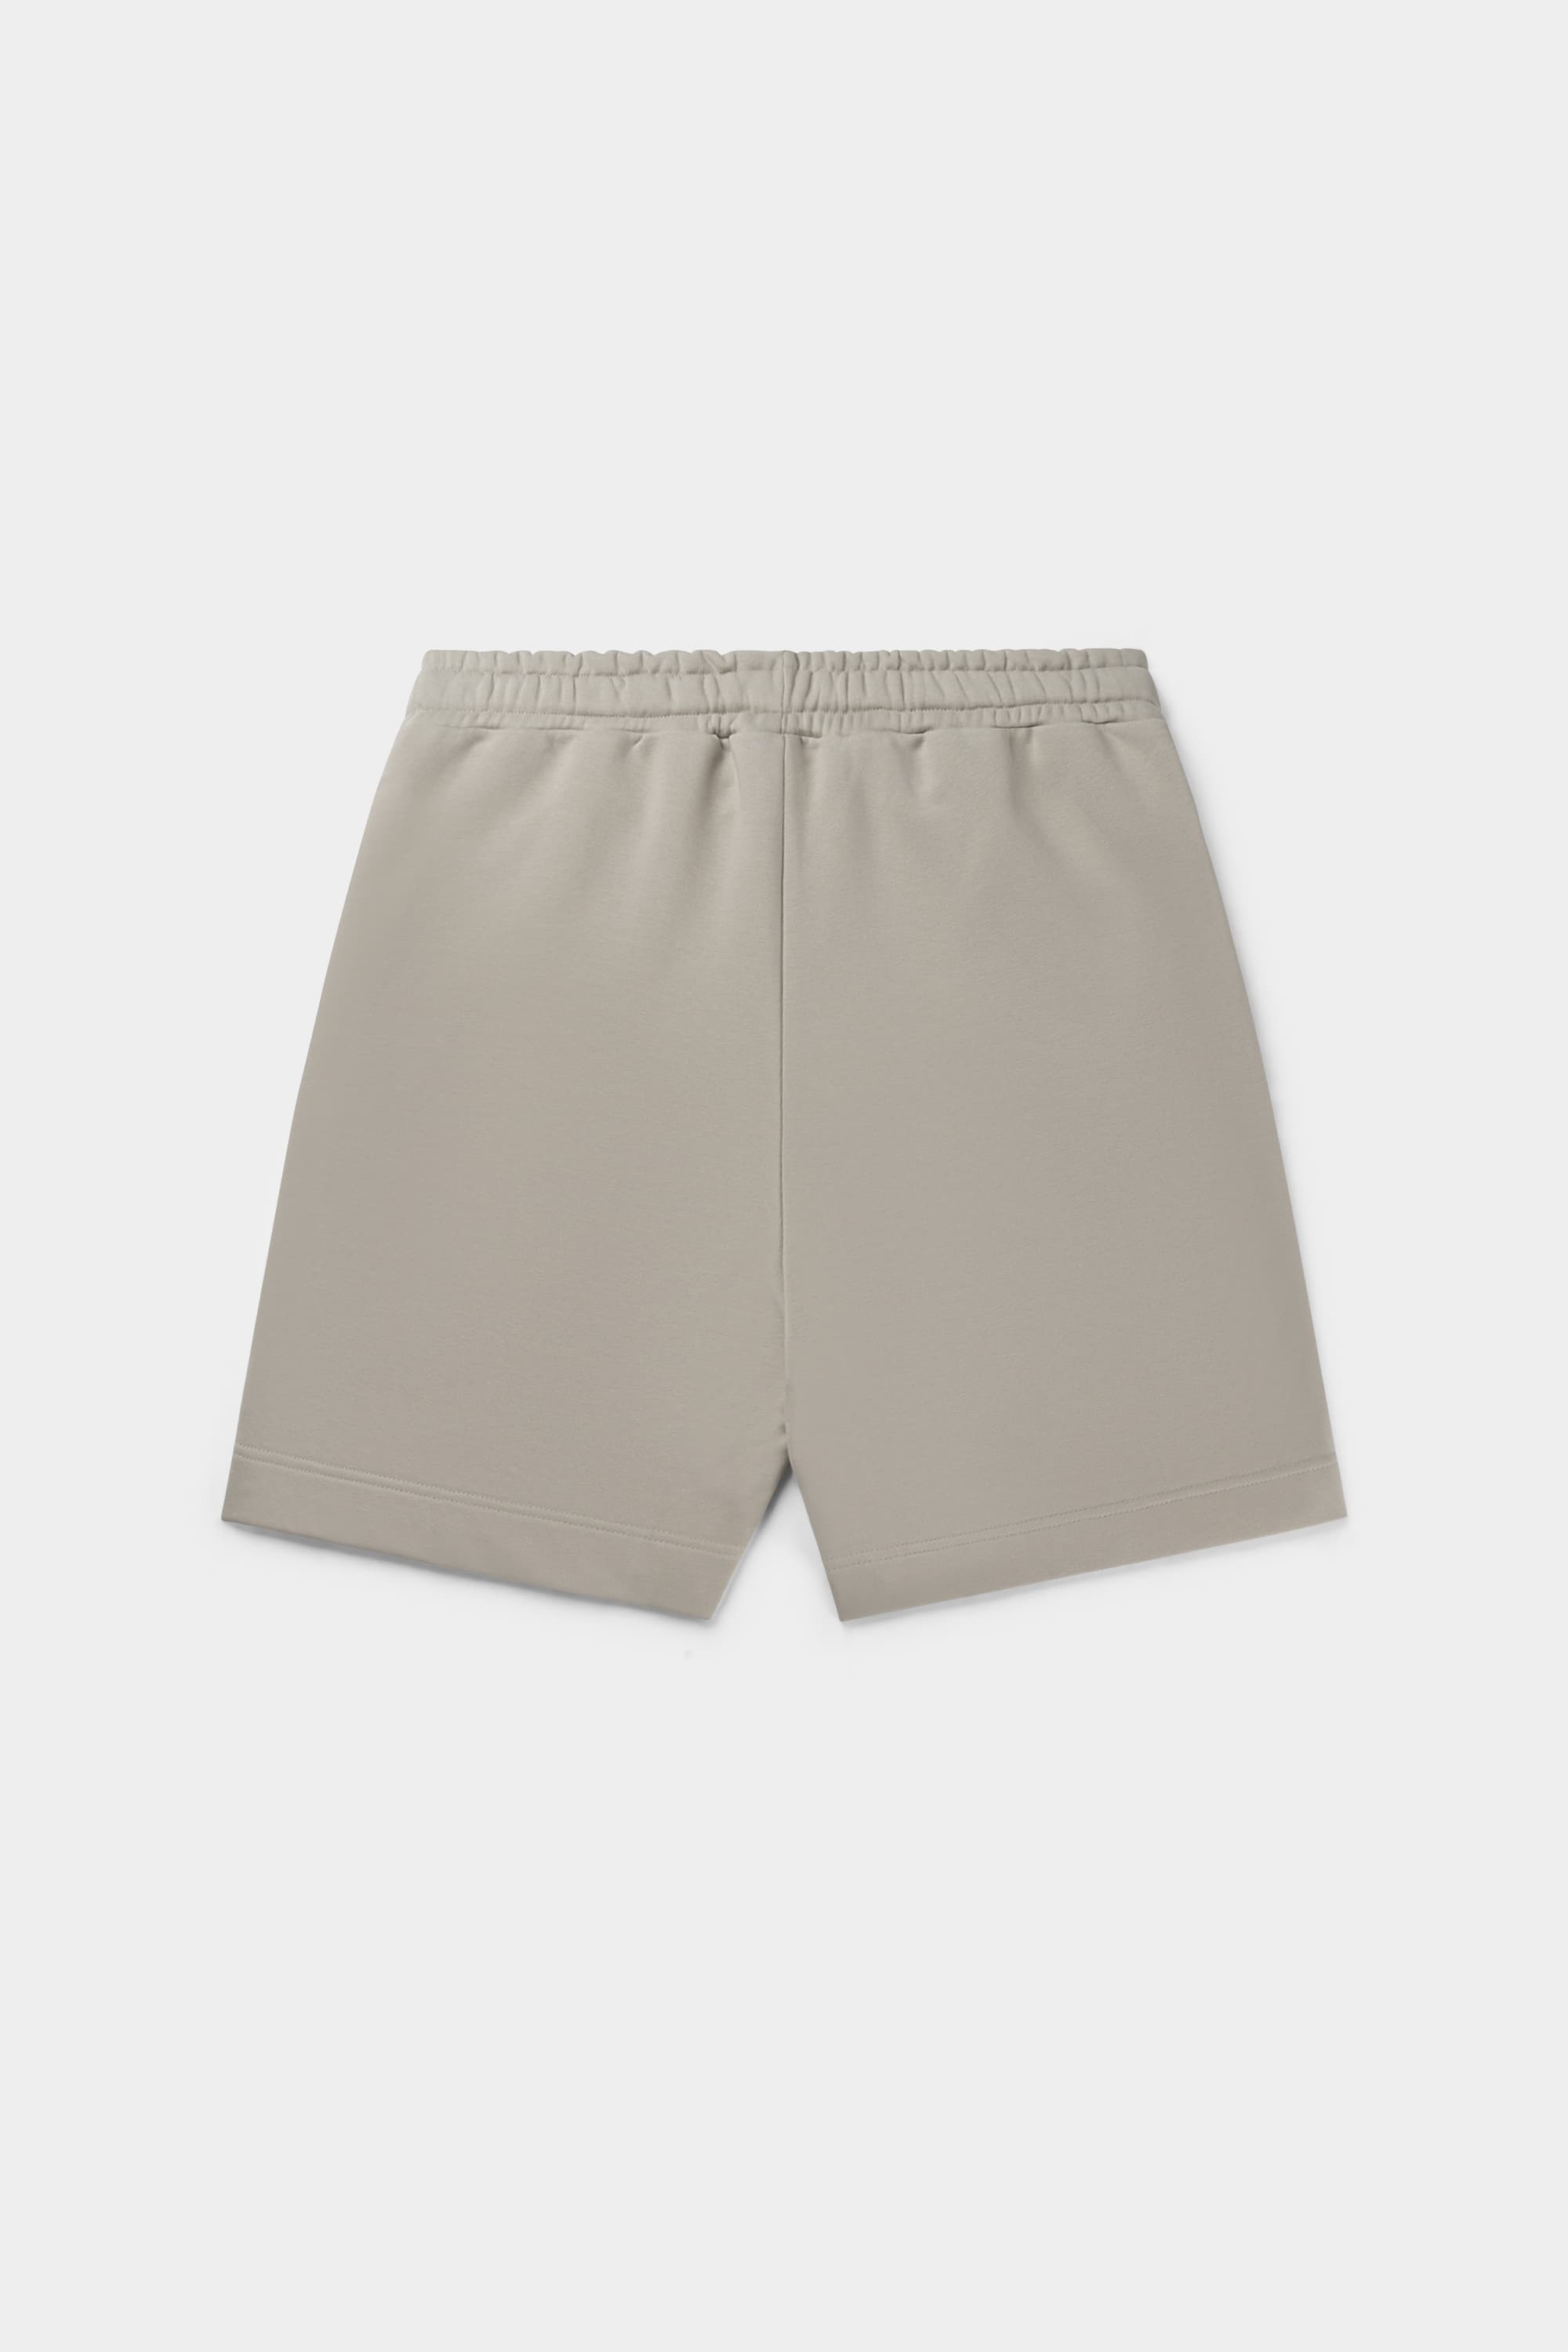 The Wall Box Fit Shorts Silver Lining